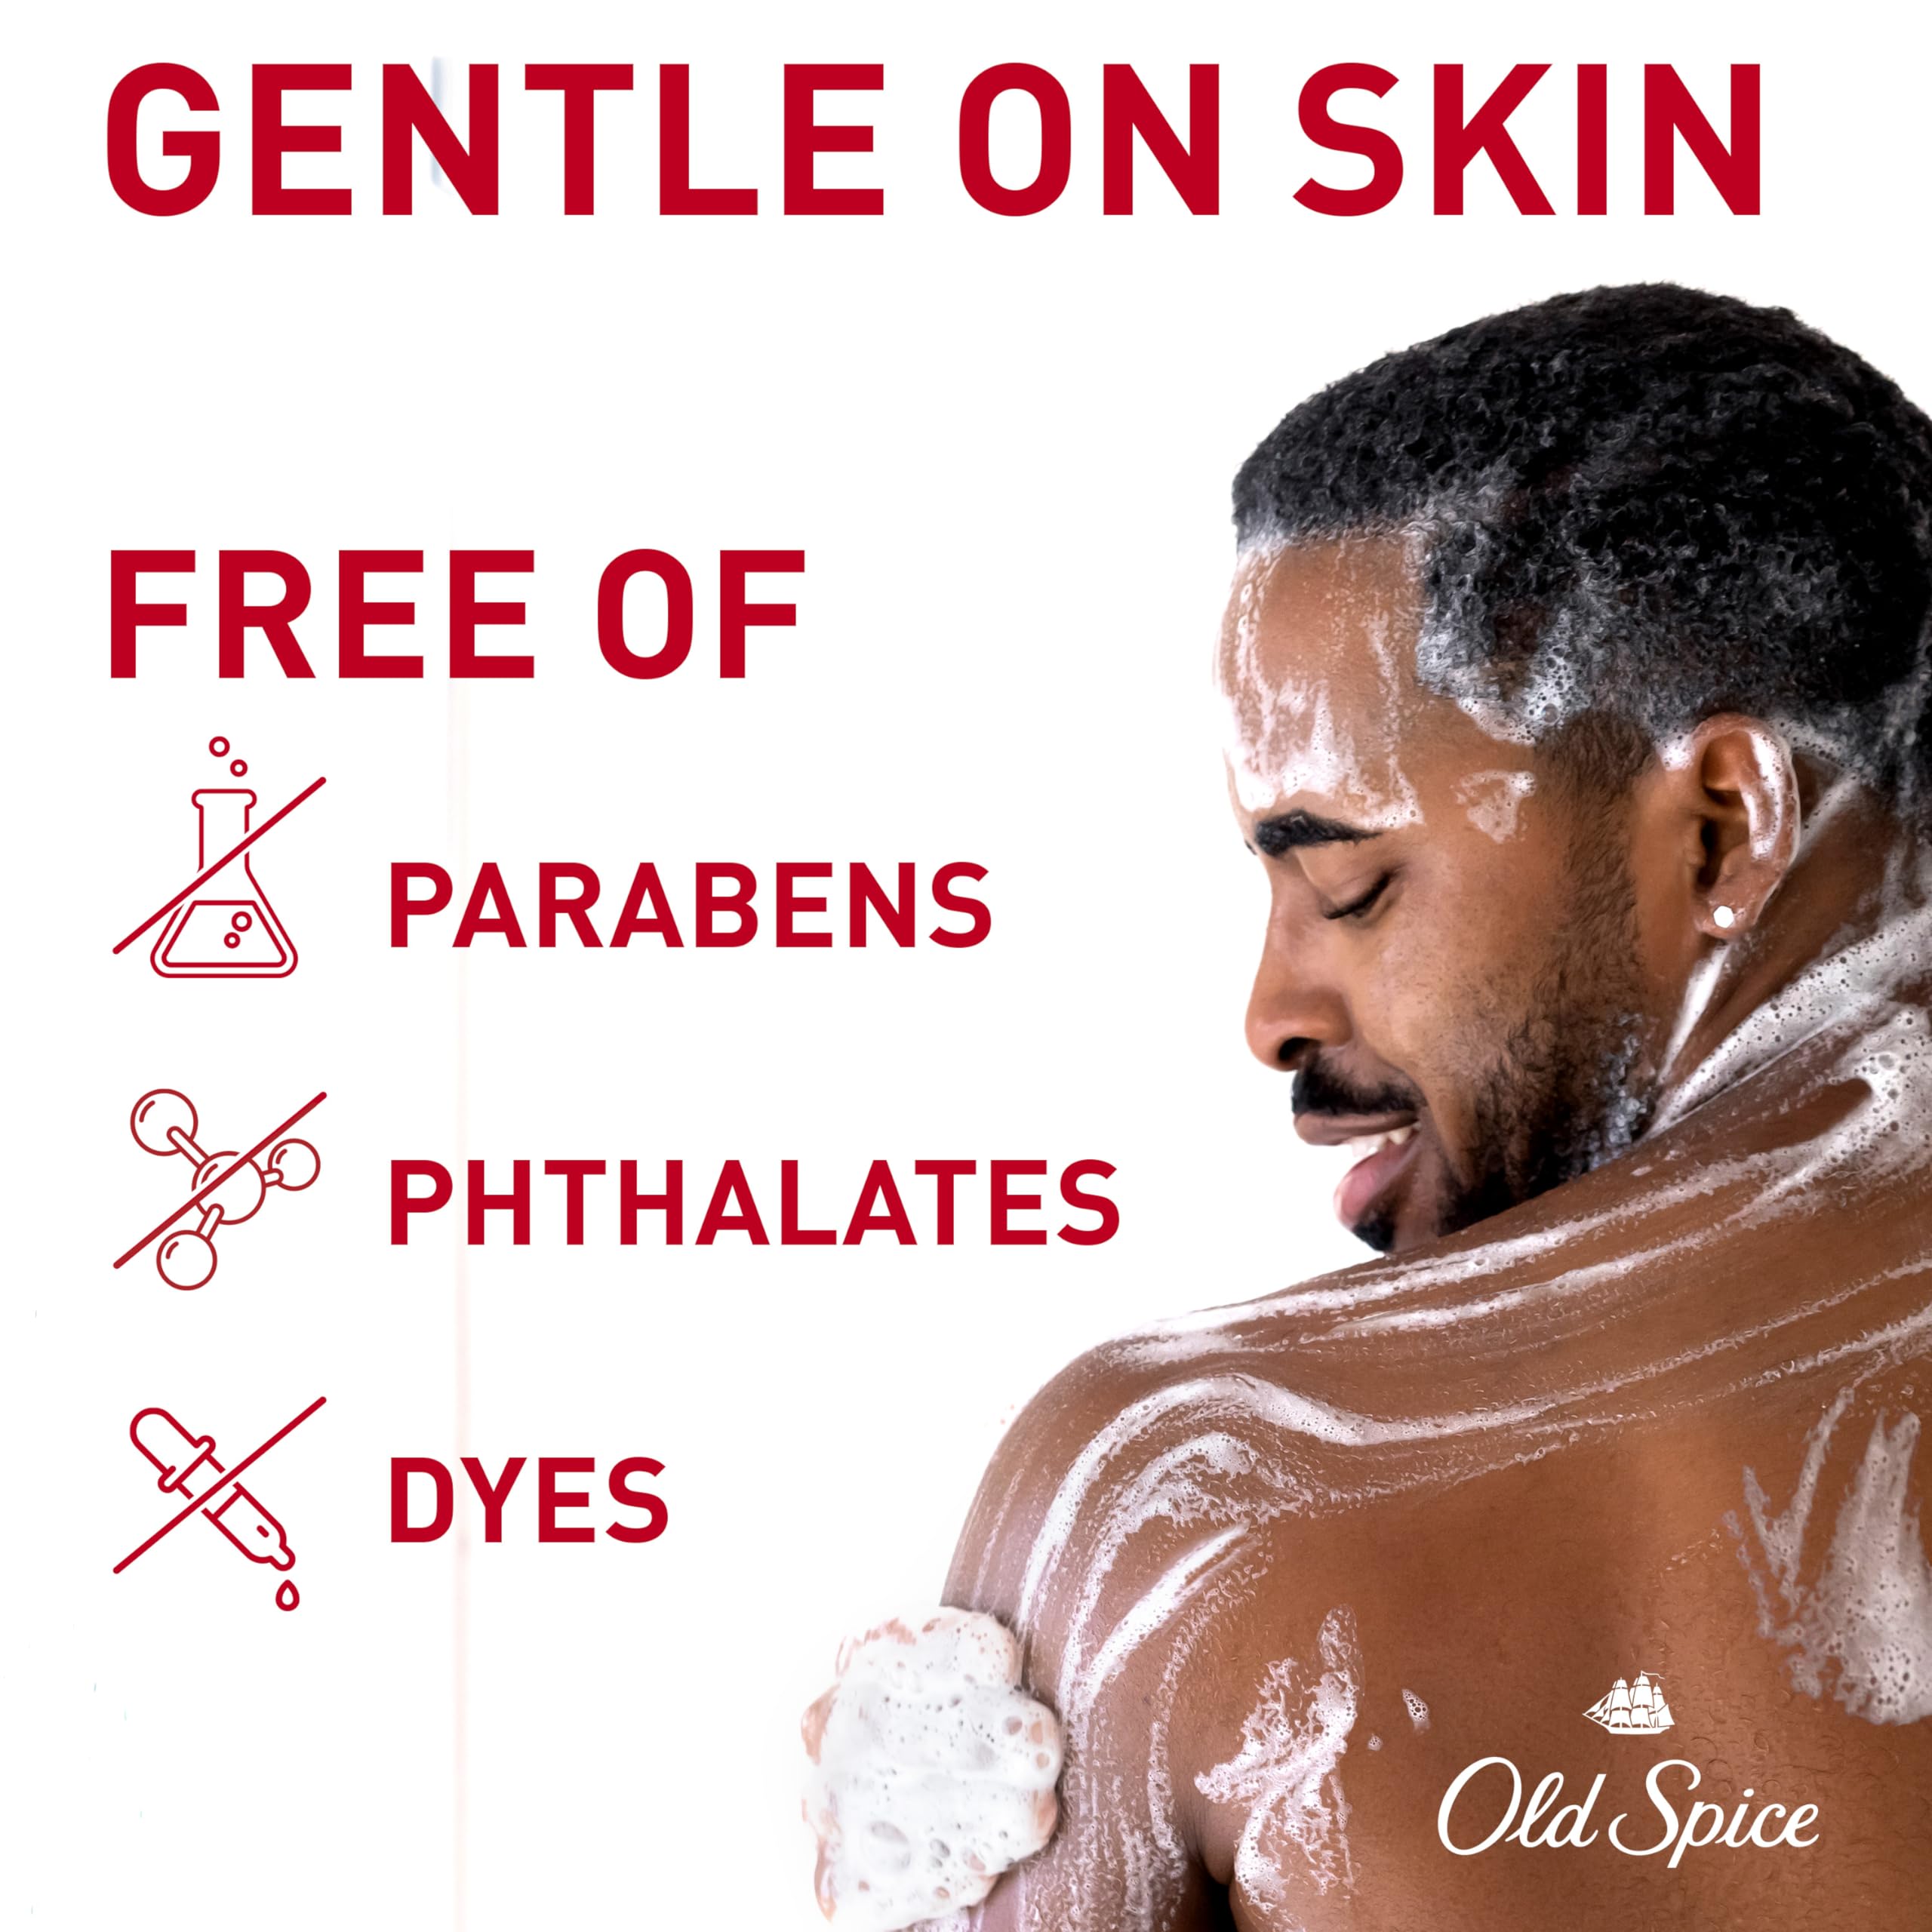 Old Spice Super Hydration Body Wash GentleMan’s Blend Vanilla + Shae for Deep Cleaning and 24/7 Renewing Moisture, 20 oz (Pack of 4)